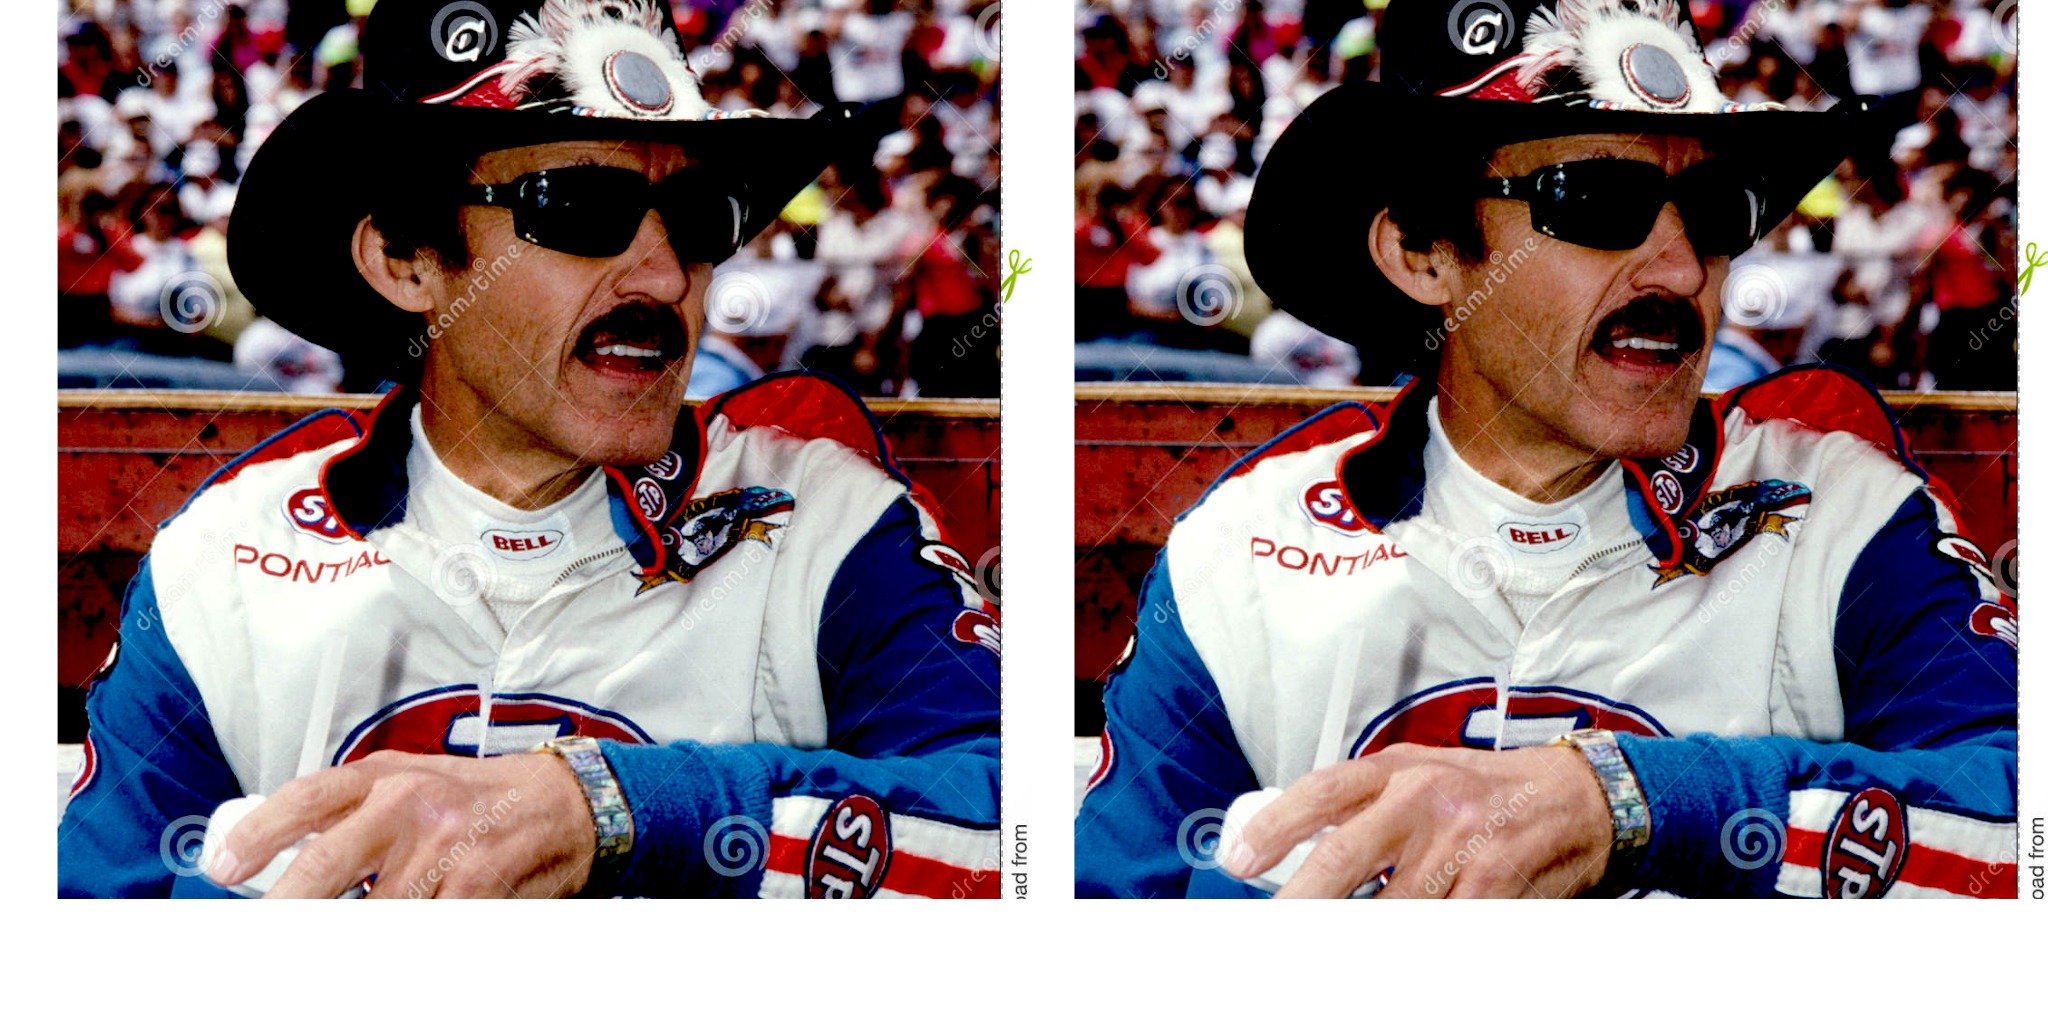 richard-petty-most-nascar-cup-wins--200-times